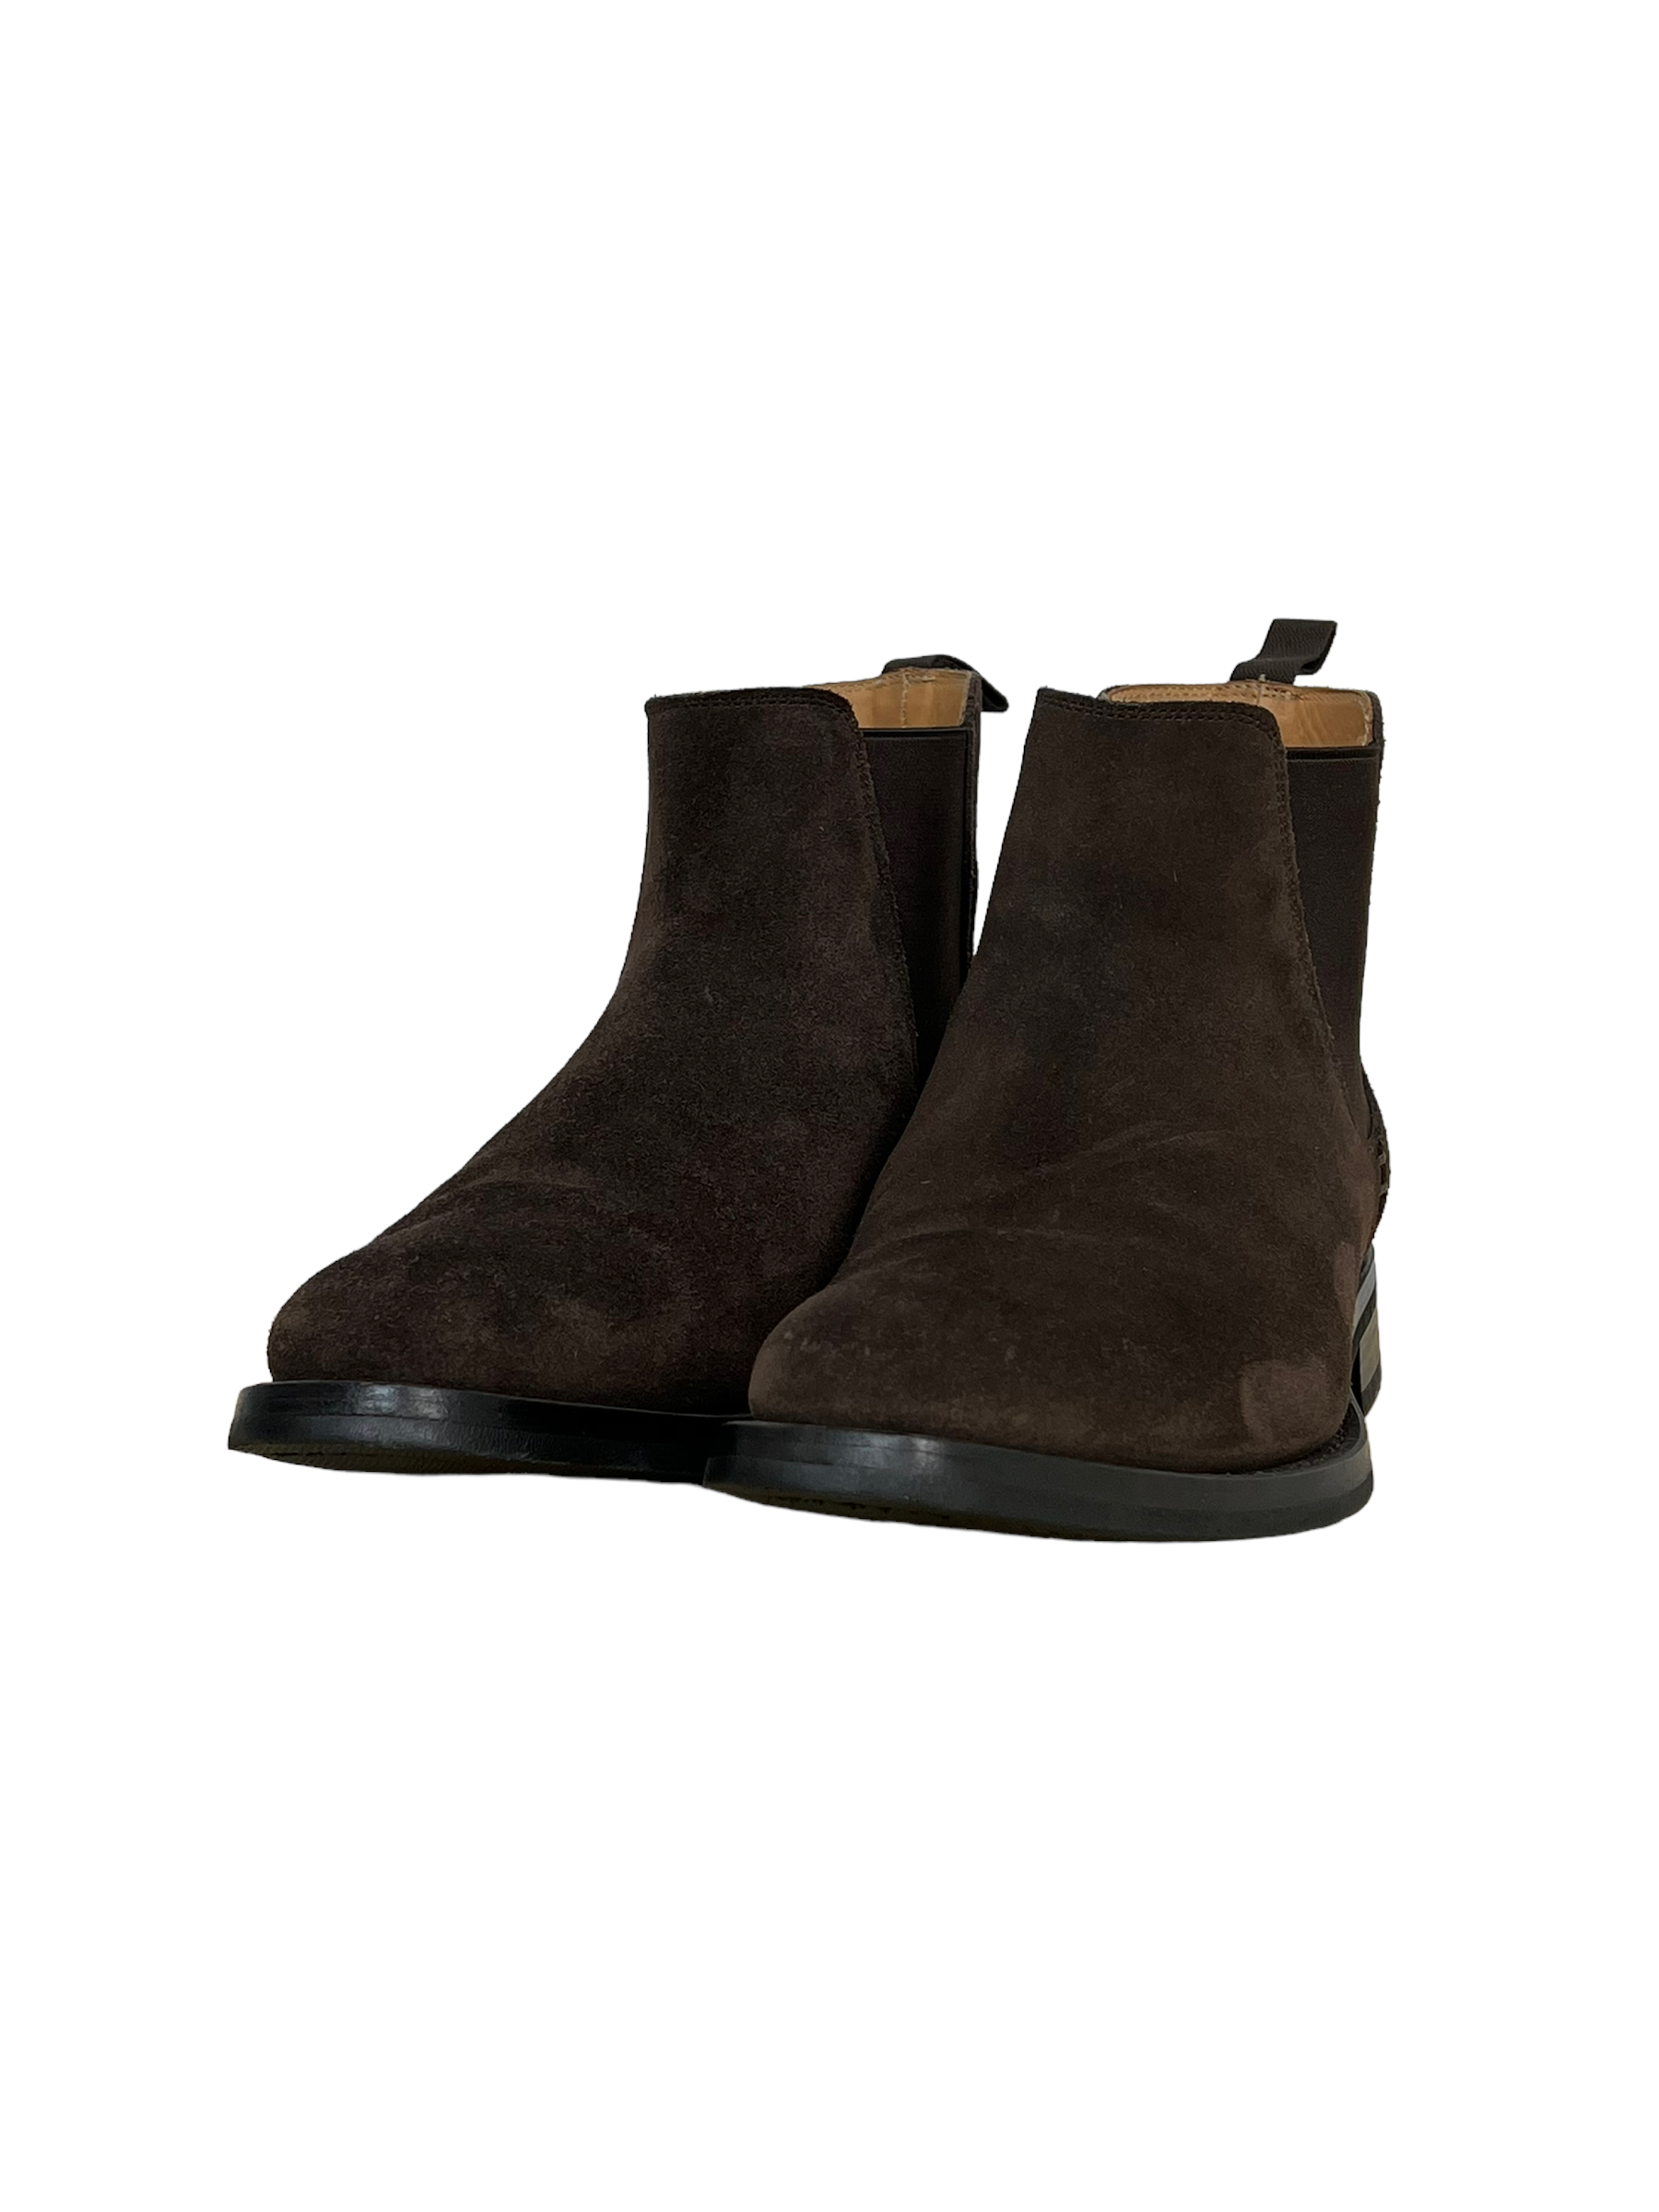 Paul Smith Dark Brown Suede Gerald Chelsea Boots - Genuine Design Luxury Consignment for Men. New & Pre-Owned Clothing, Shoes, & Accessories. Calgary, Canada